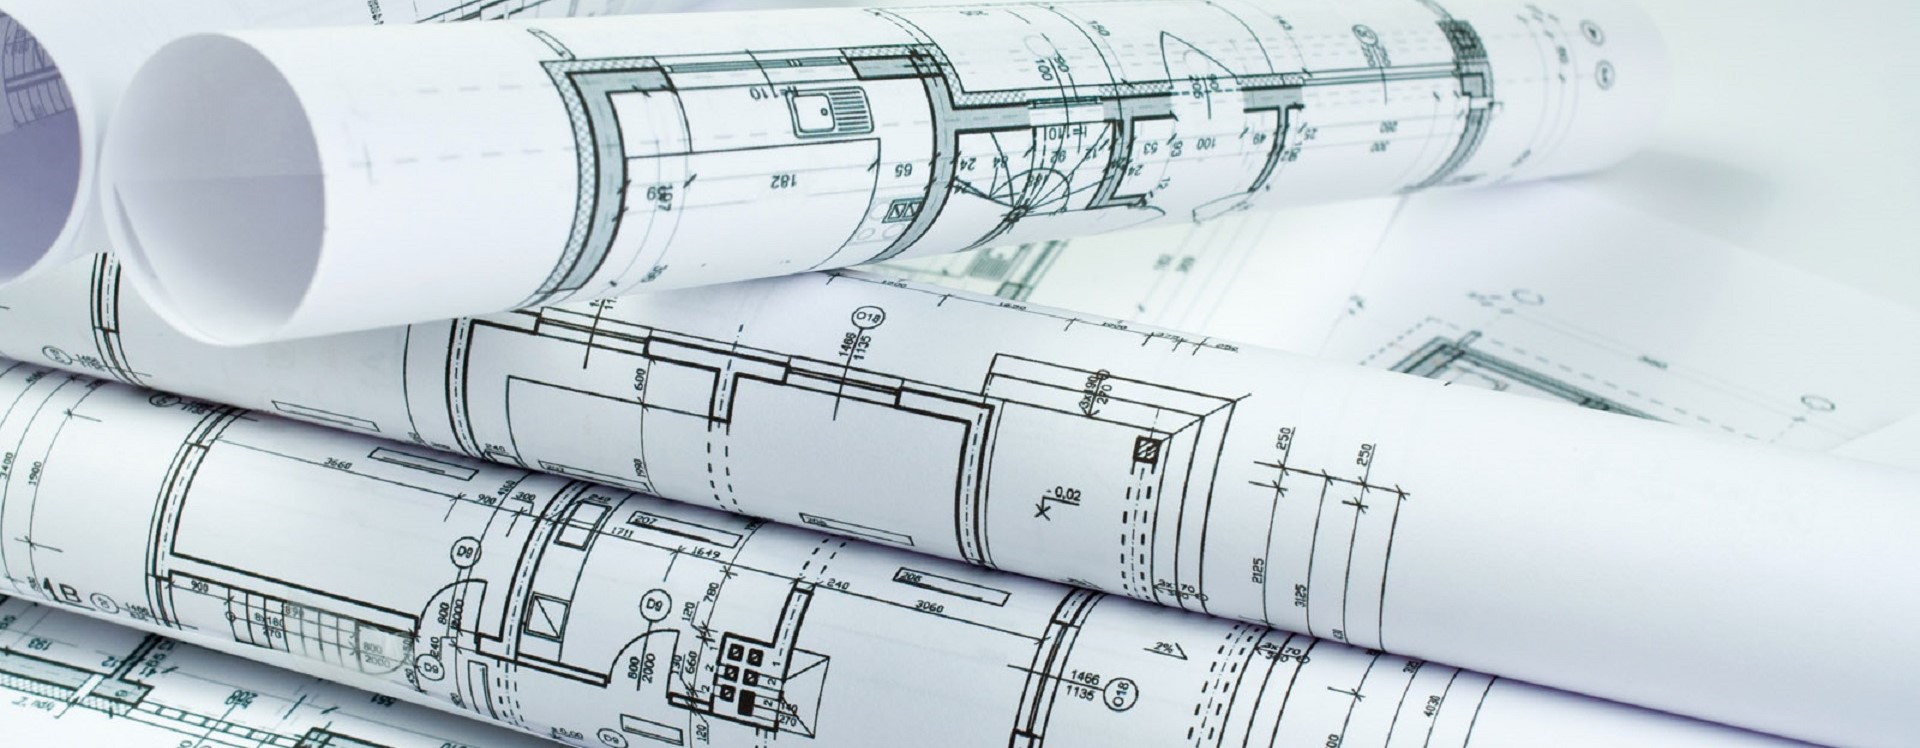 design and planning drawings online